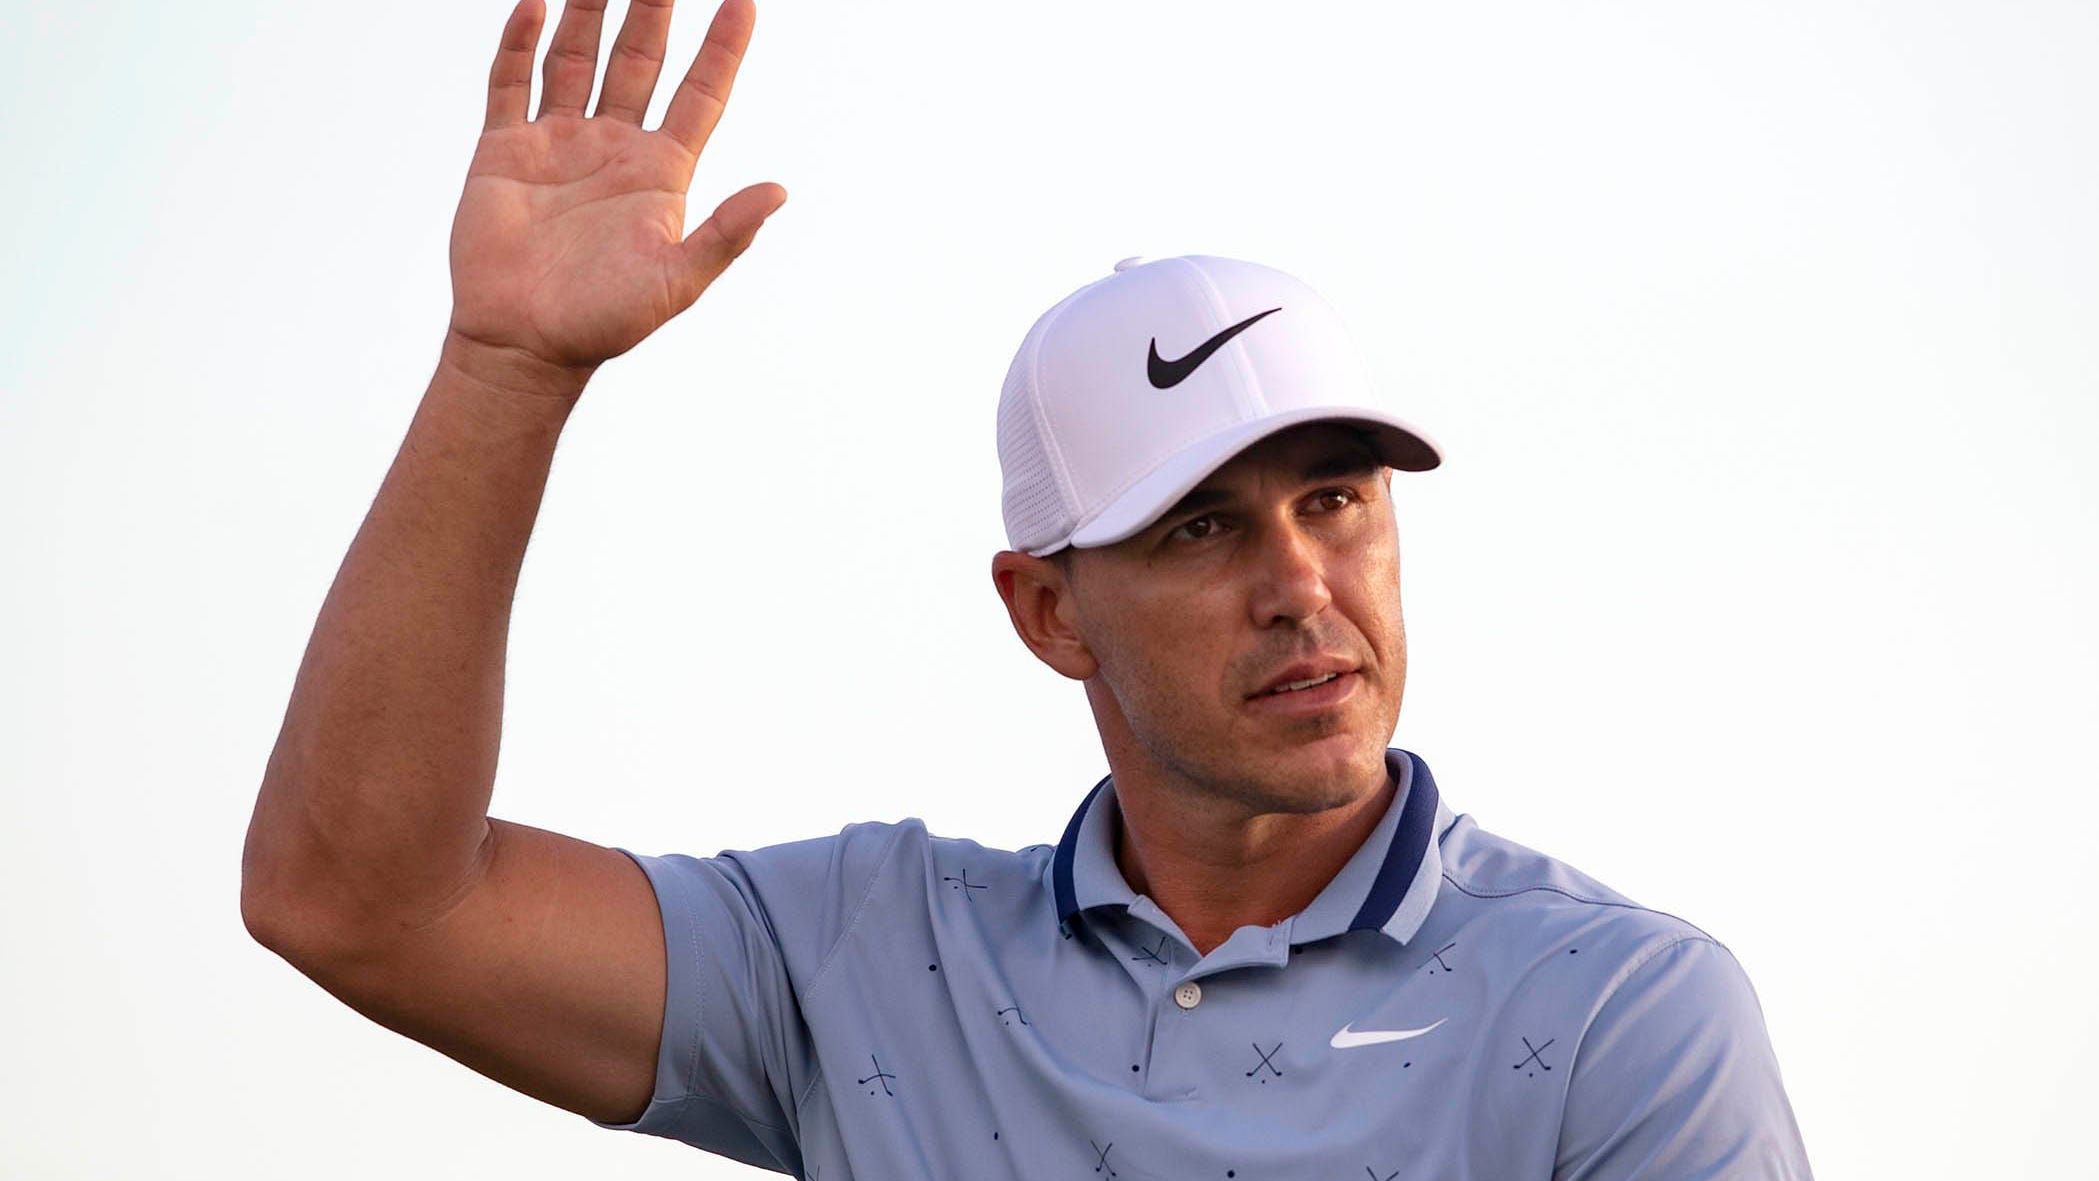 Brooks Koepka wins LIV Jeddah for first professional win in 20 months